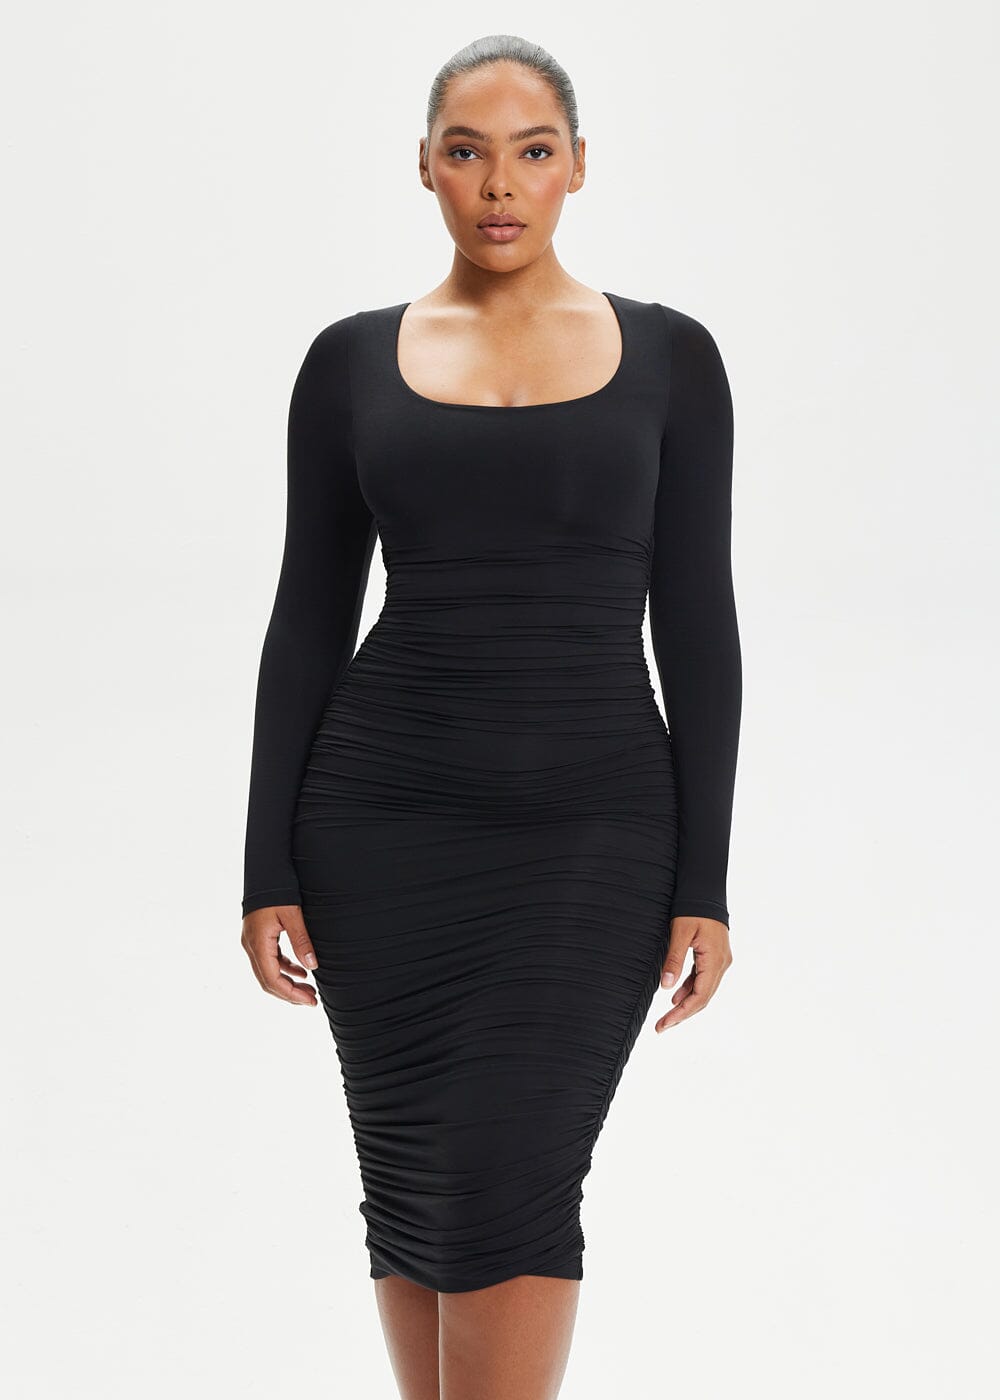 Nothing better than Power Mesh 🖤 Shapewear Dress Ruching Power Mesh  flatters every curves and keeps you snatched ✨ #sheswaisted